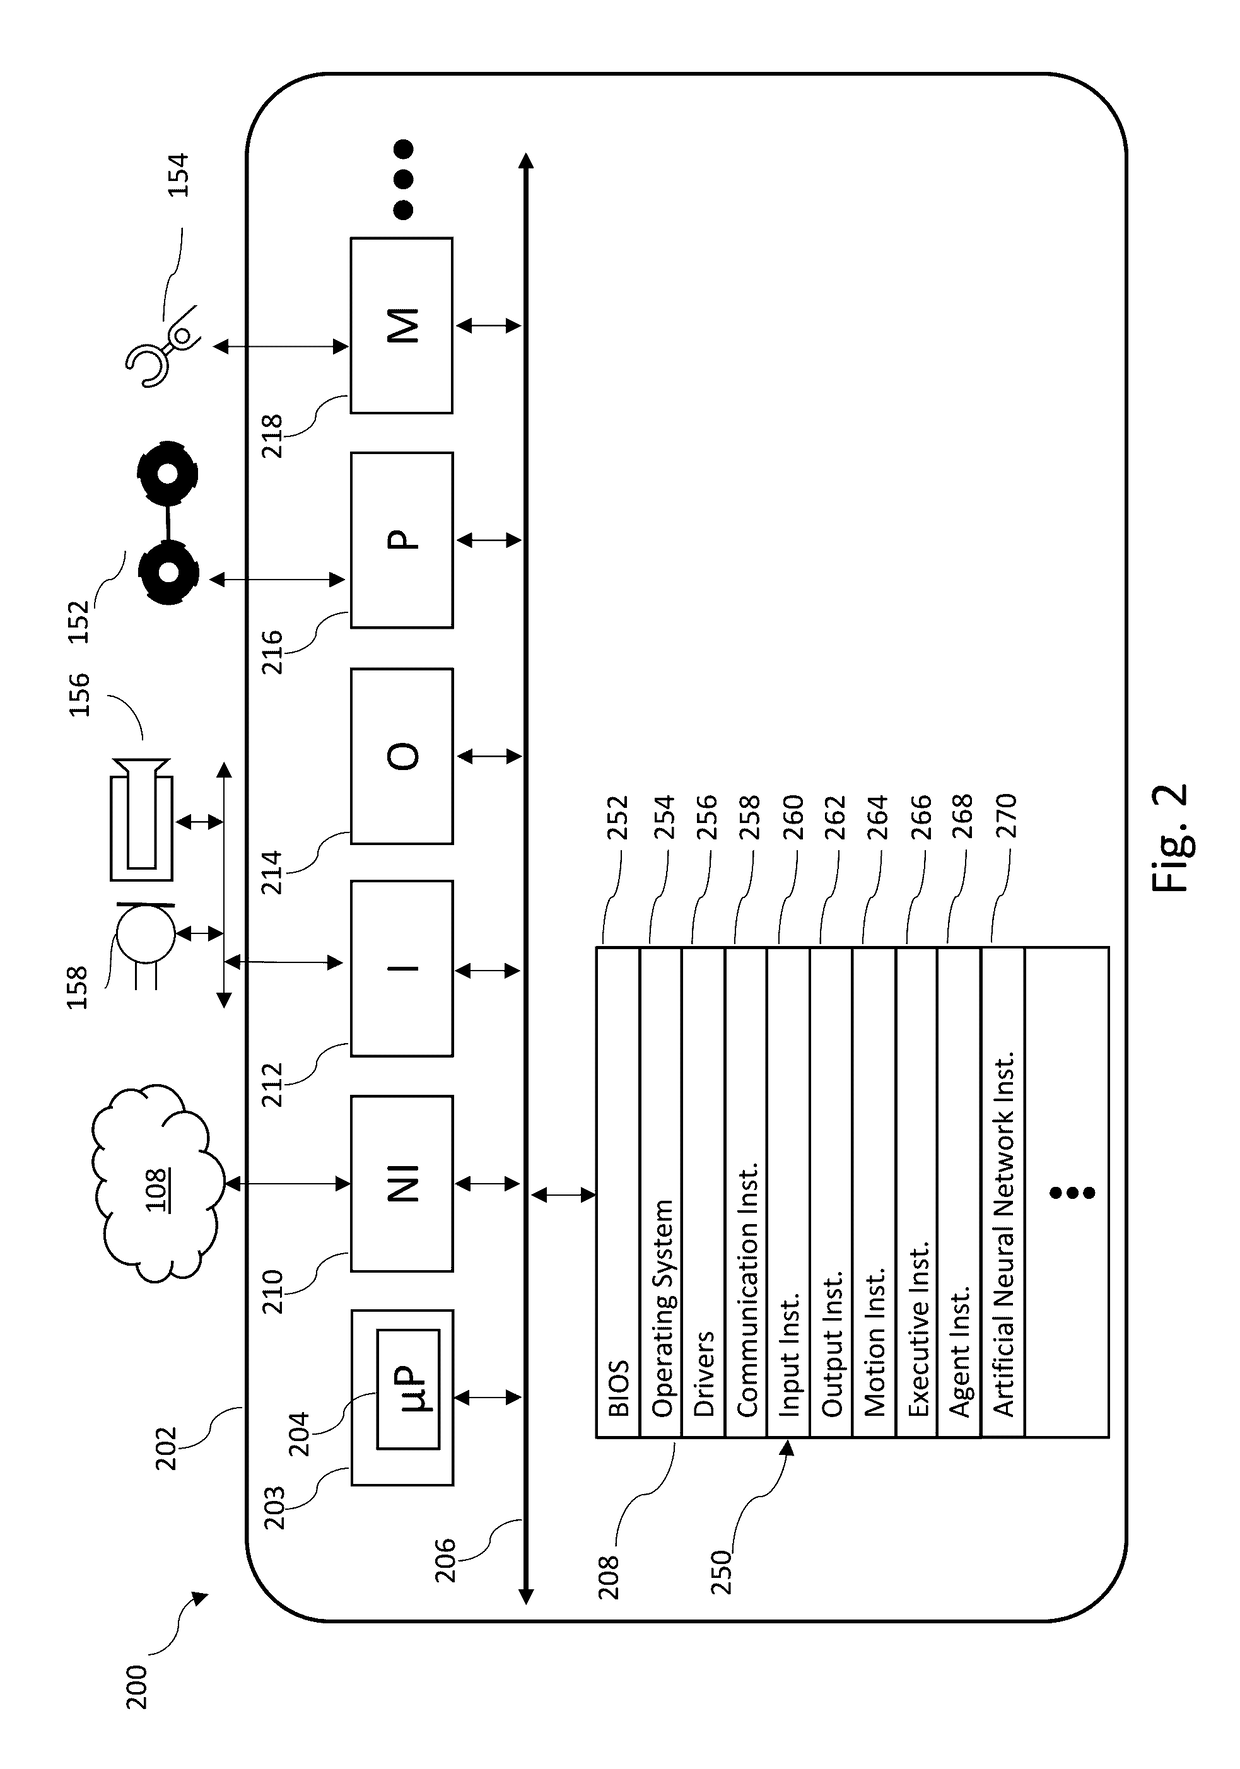 Systems, devices, and methods for distributed artificial neural network computation